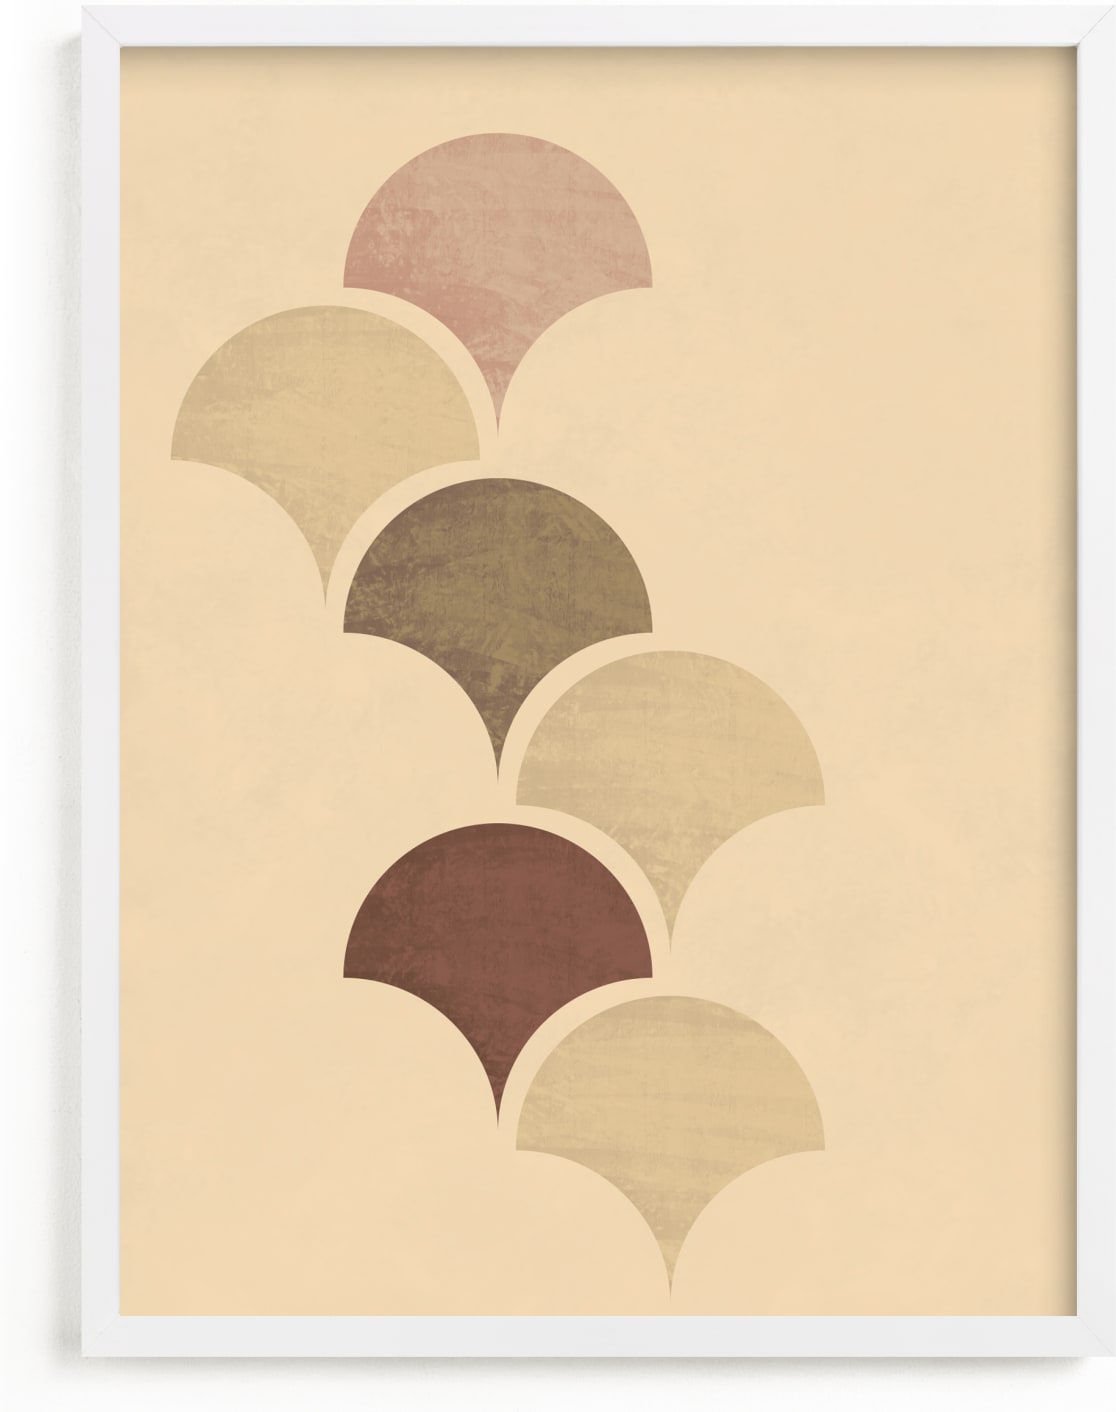 This is a brown art by Yohaku Oshima called Ginkgo Leaves.